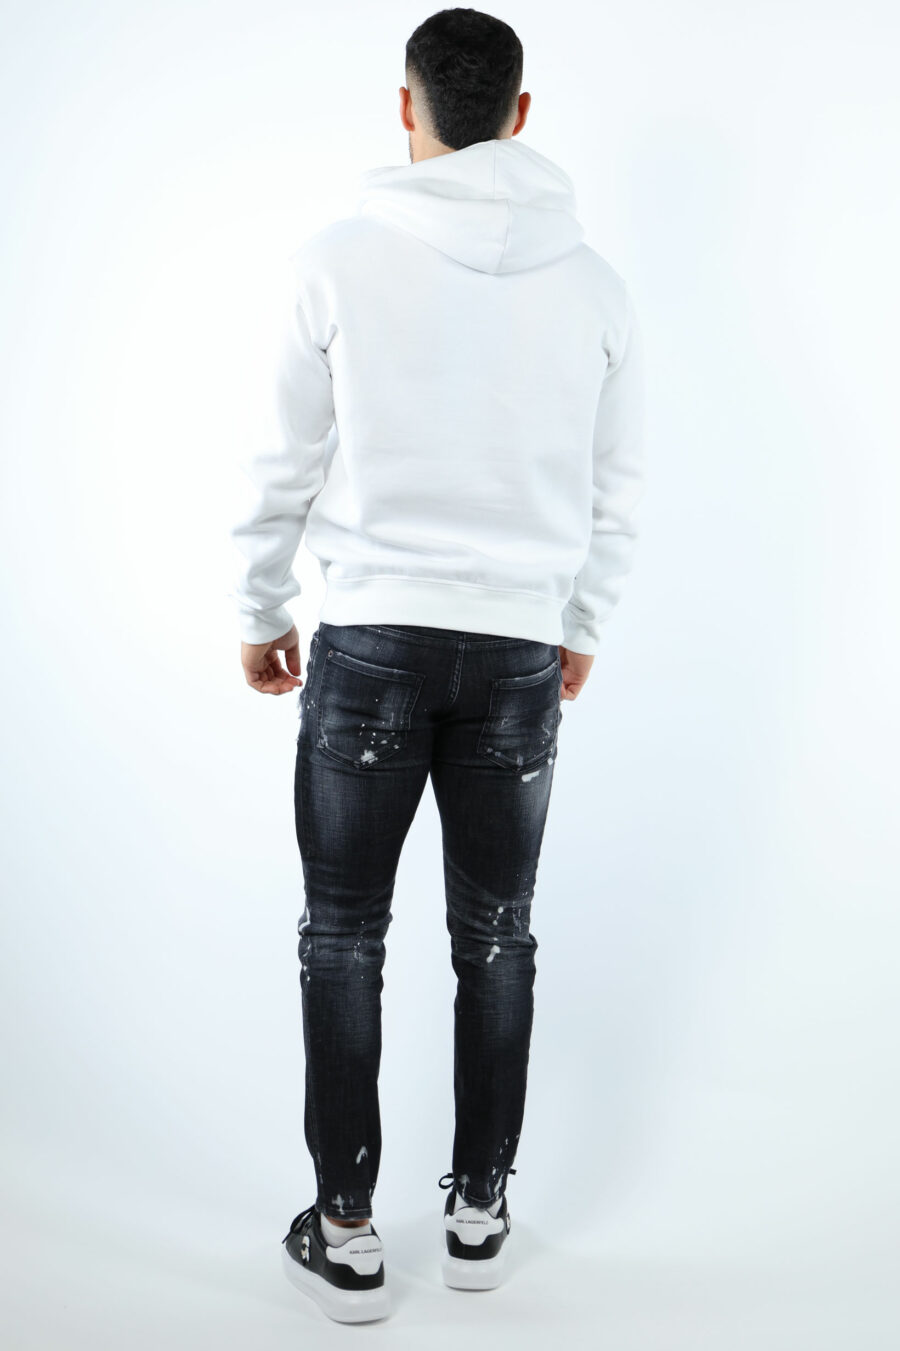 Black "skater jean" trousers with rips and semi-worn - 106774